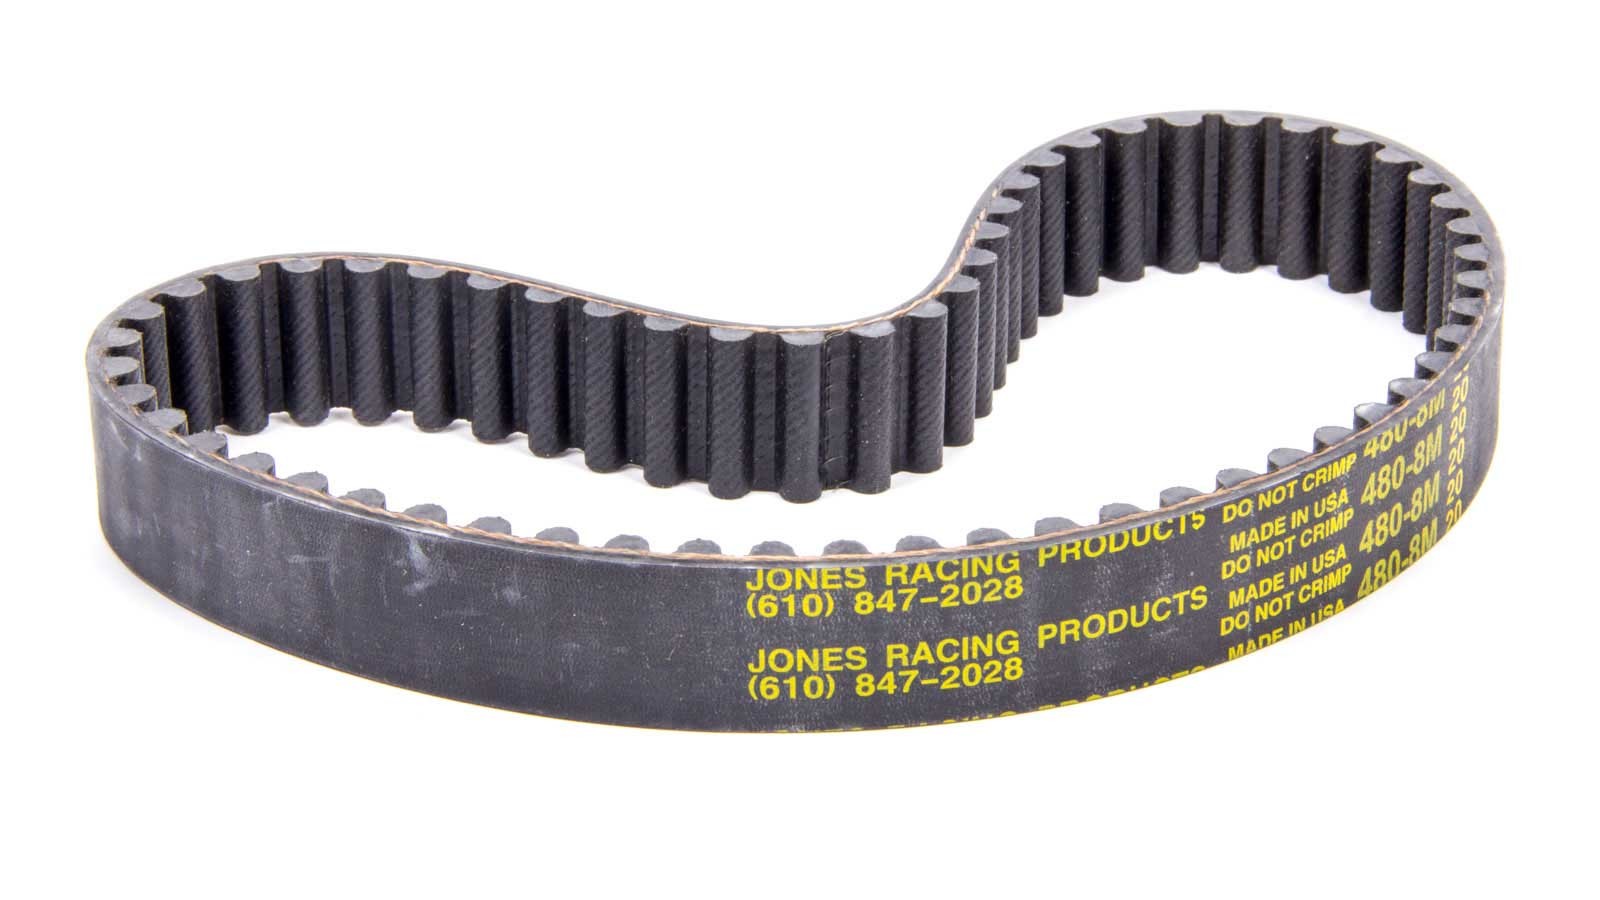 Jones Racing Products 480-20HD HTD Drive Belt, 18.900 in Long, 20 mm Wide, 8 mm Pitch, Each